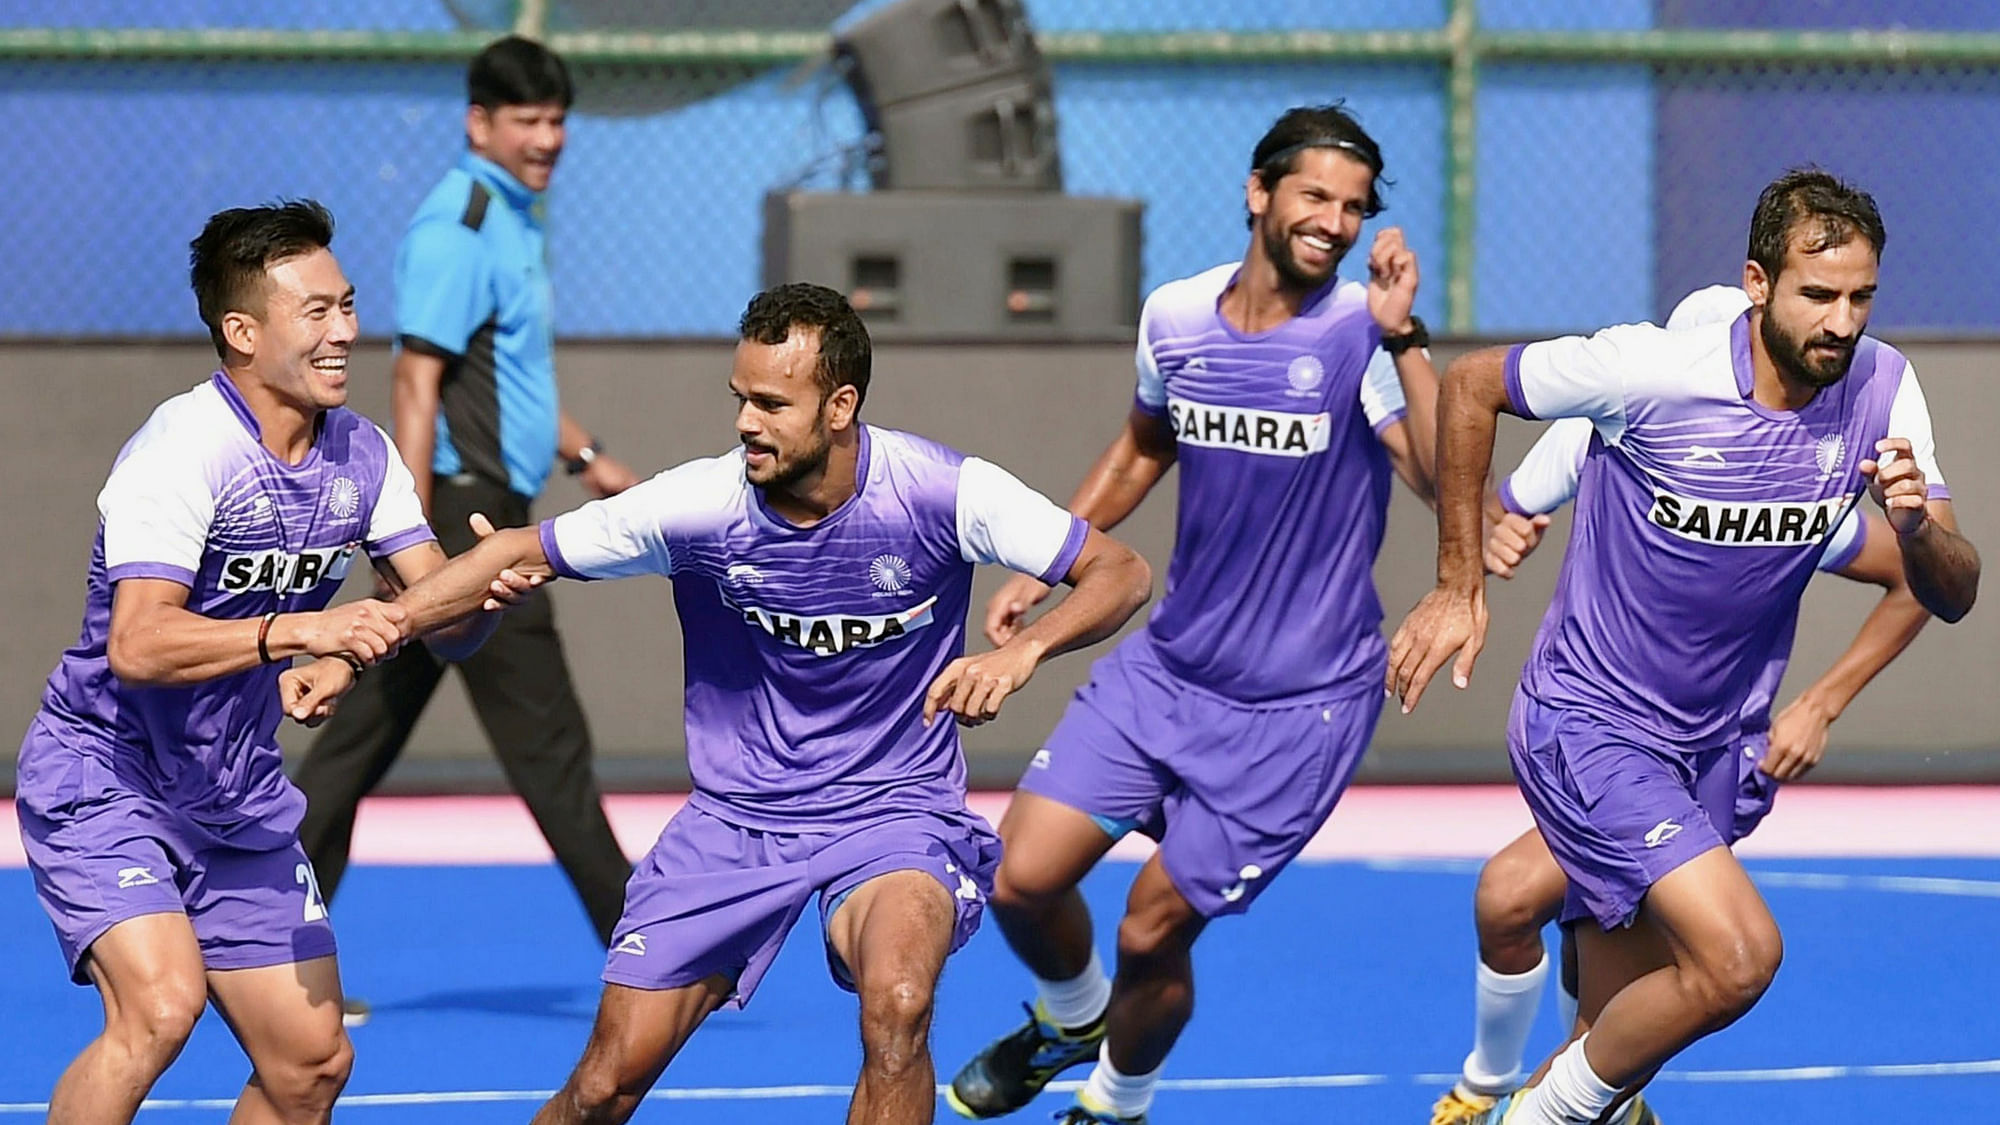 India take on Germany in their final Pool B match on 4 December.